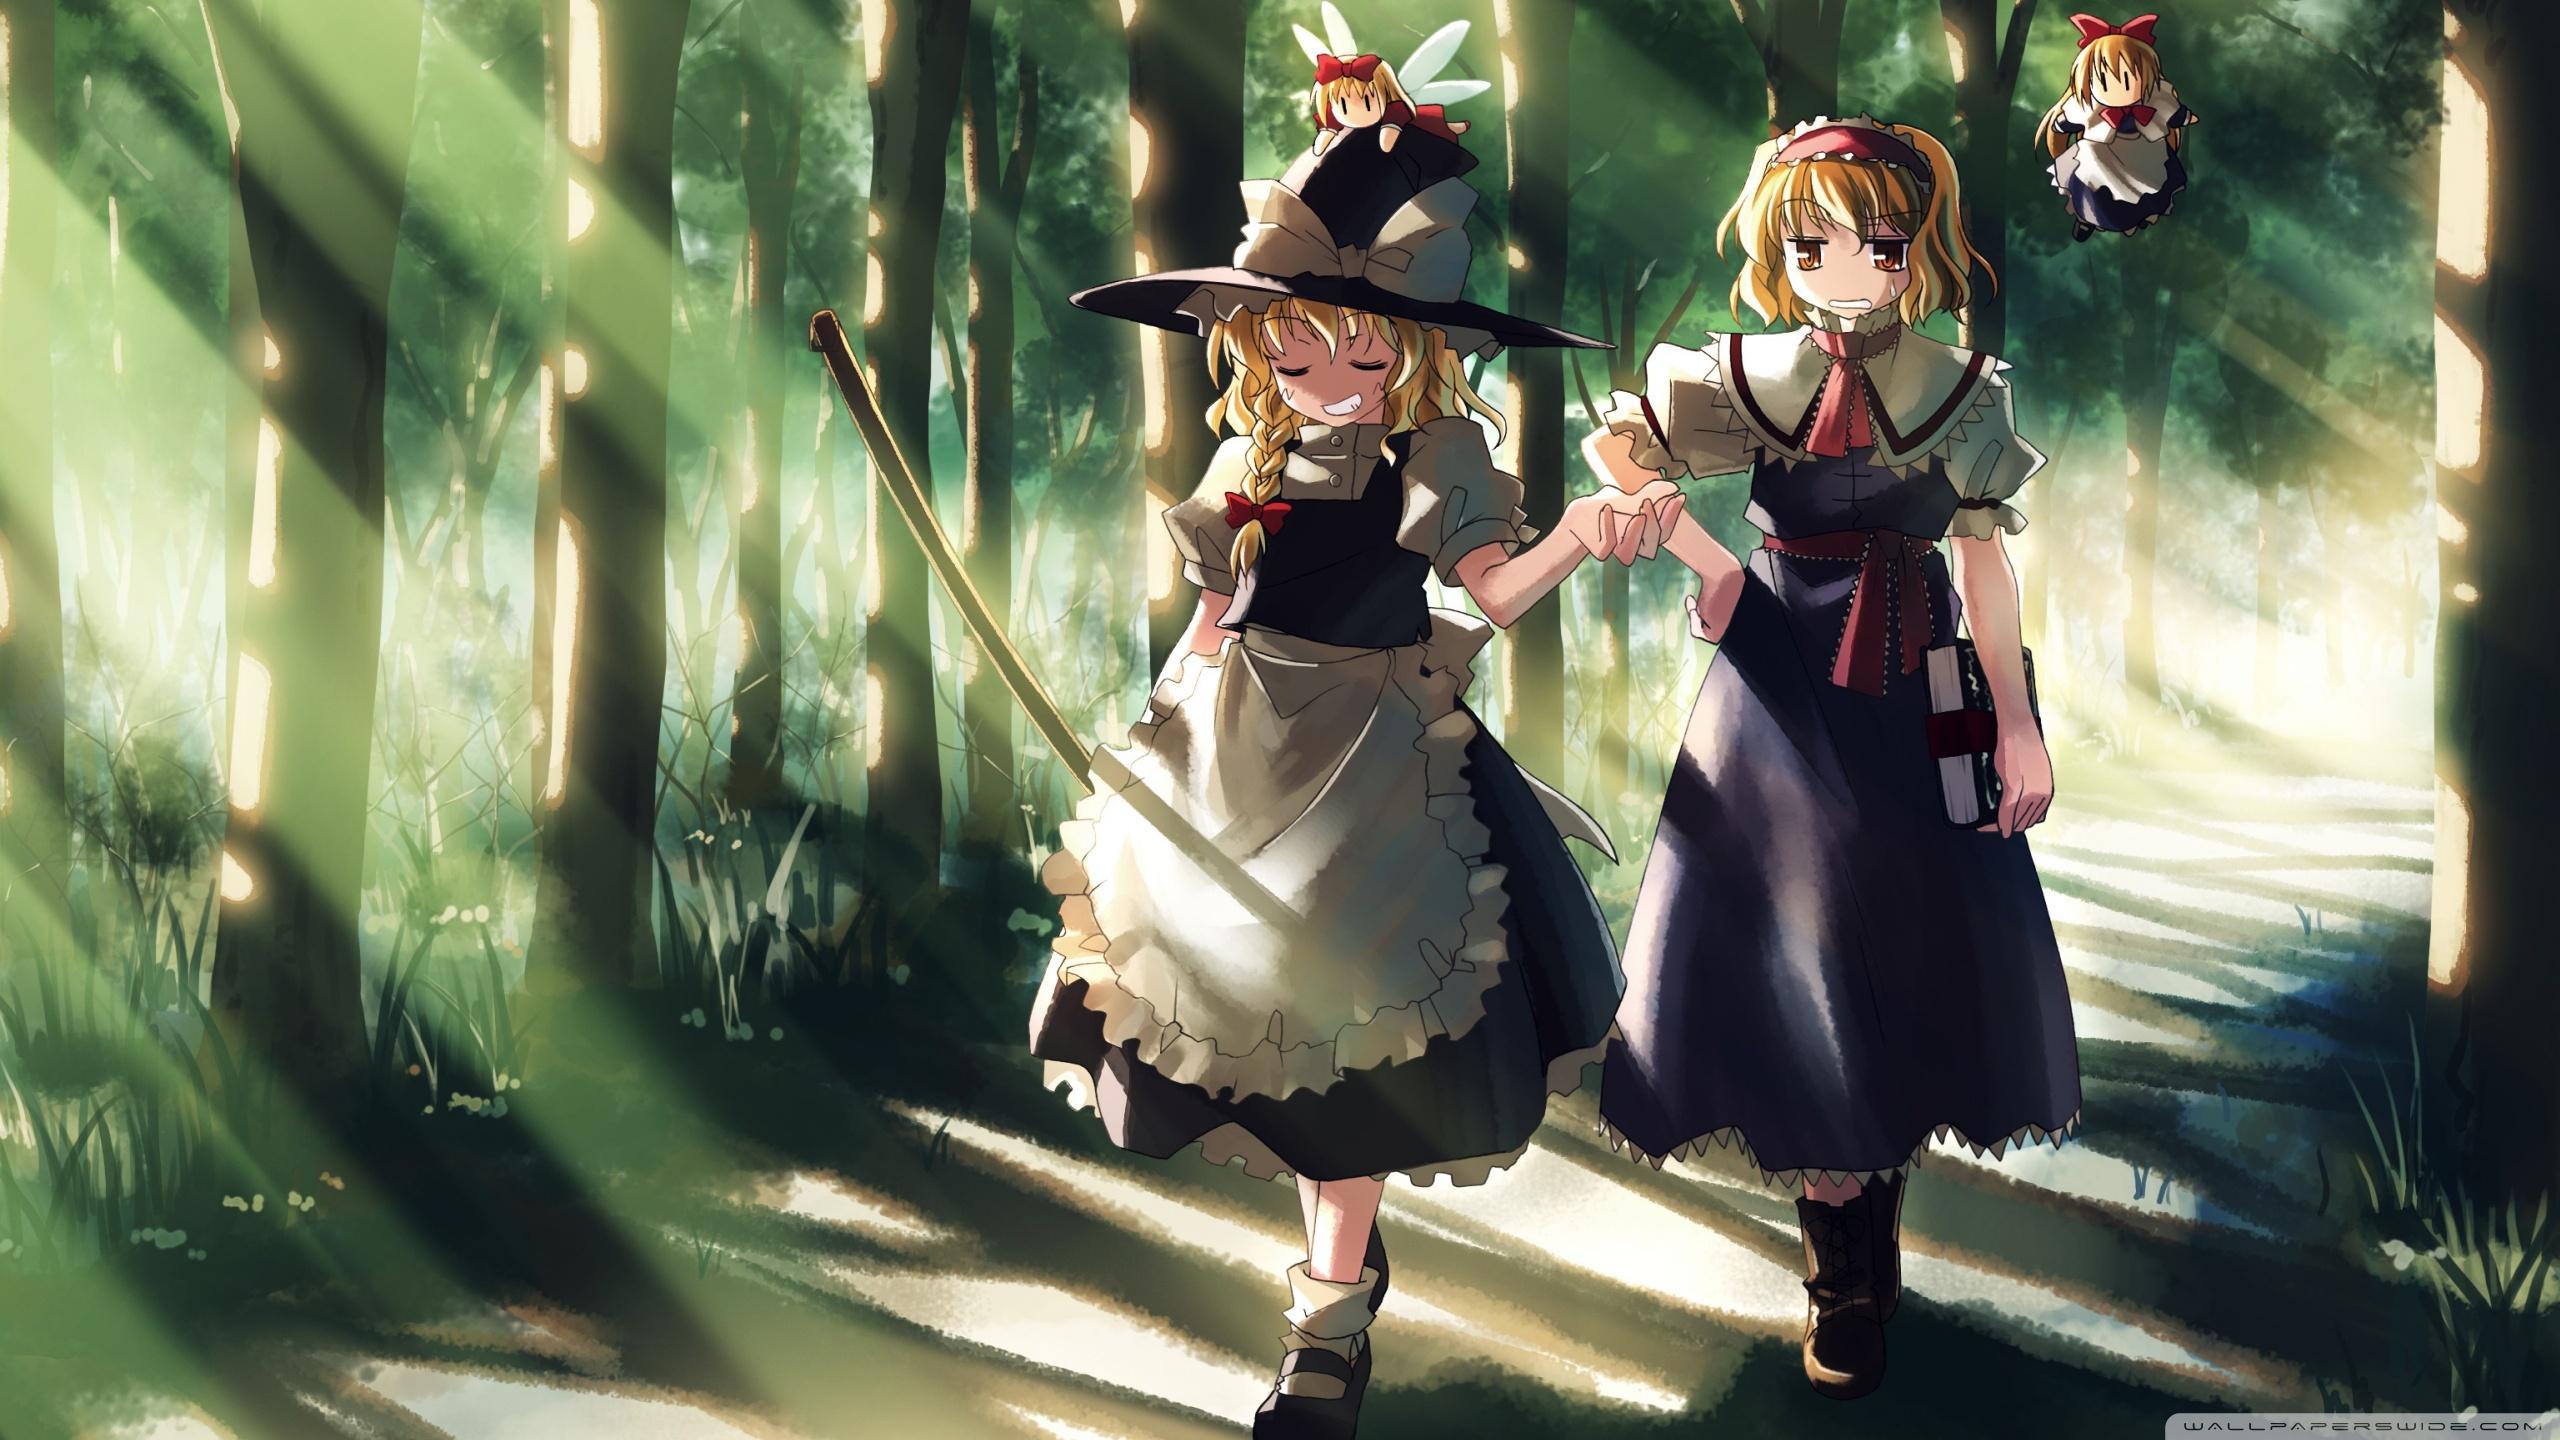 2560 x 1440 · jpeg - Anime Wizards Wallpapers - Wallpaper Cave